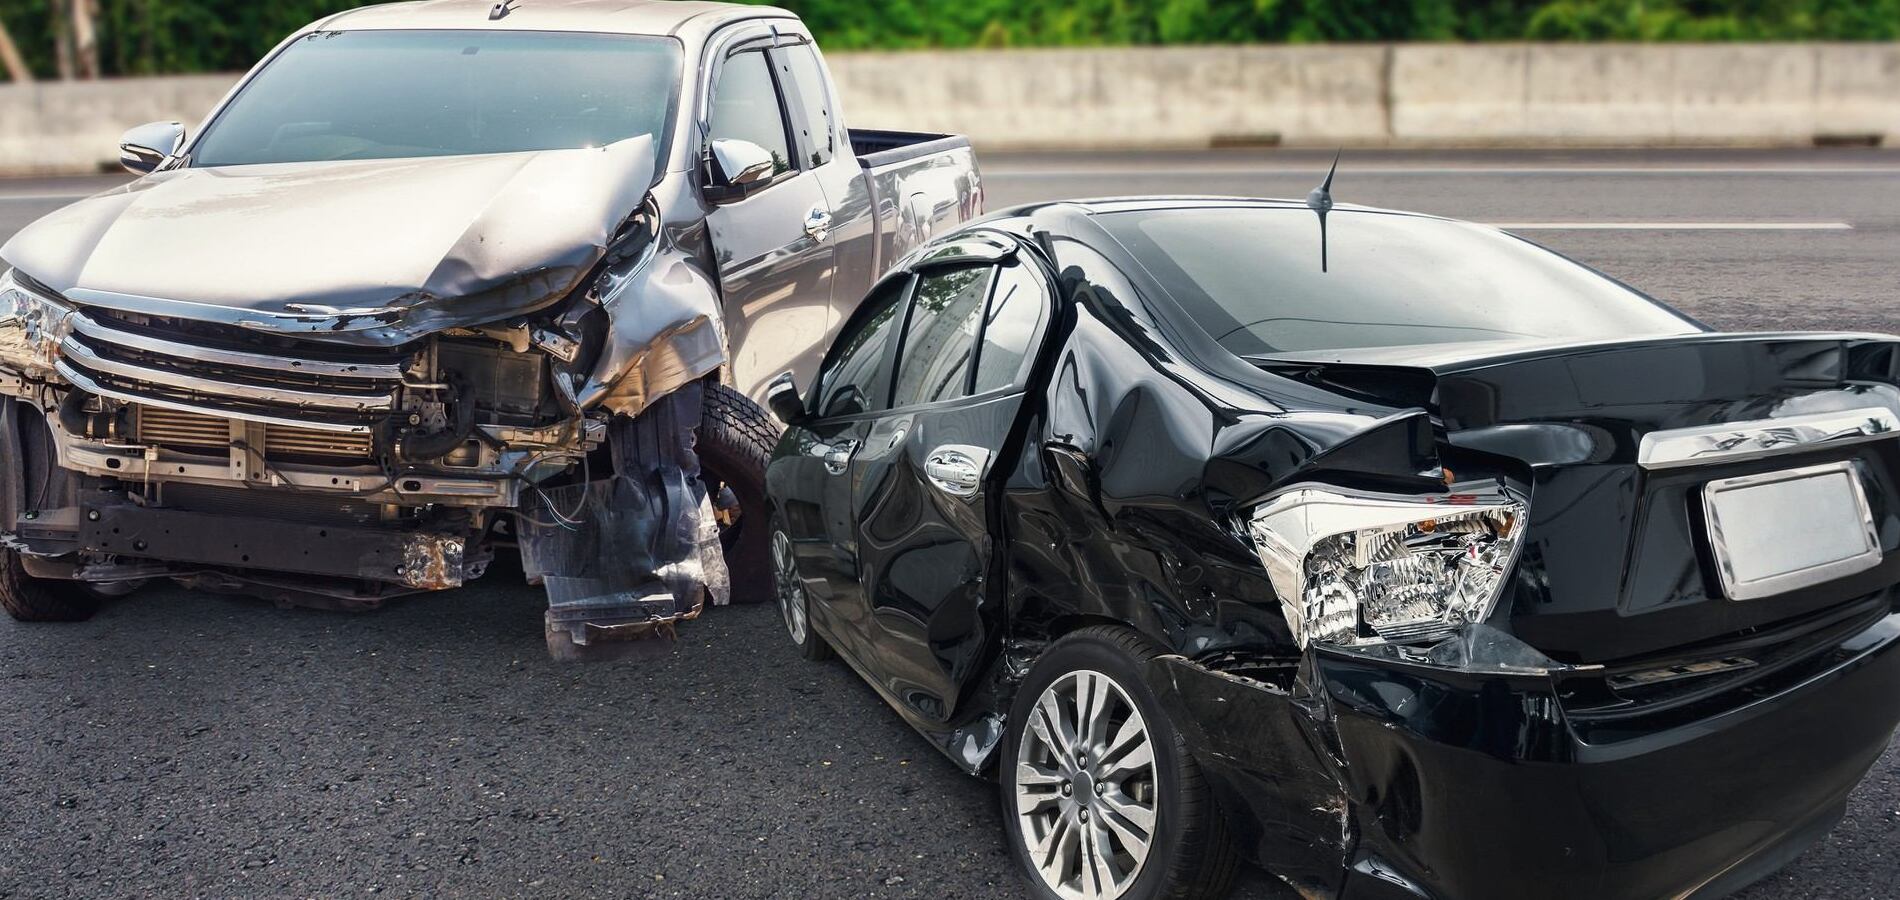 Car Accident Lawyer in Cypress, CA